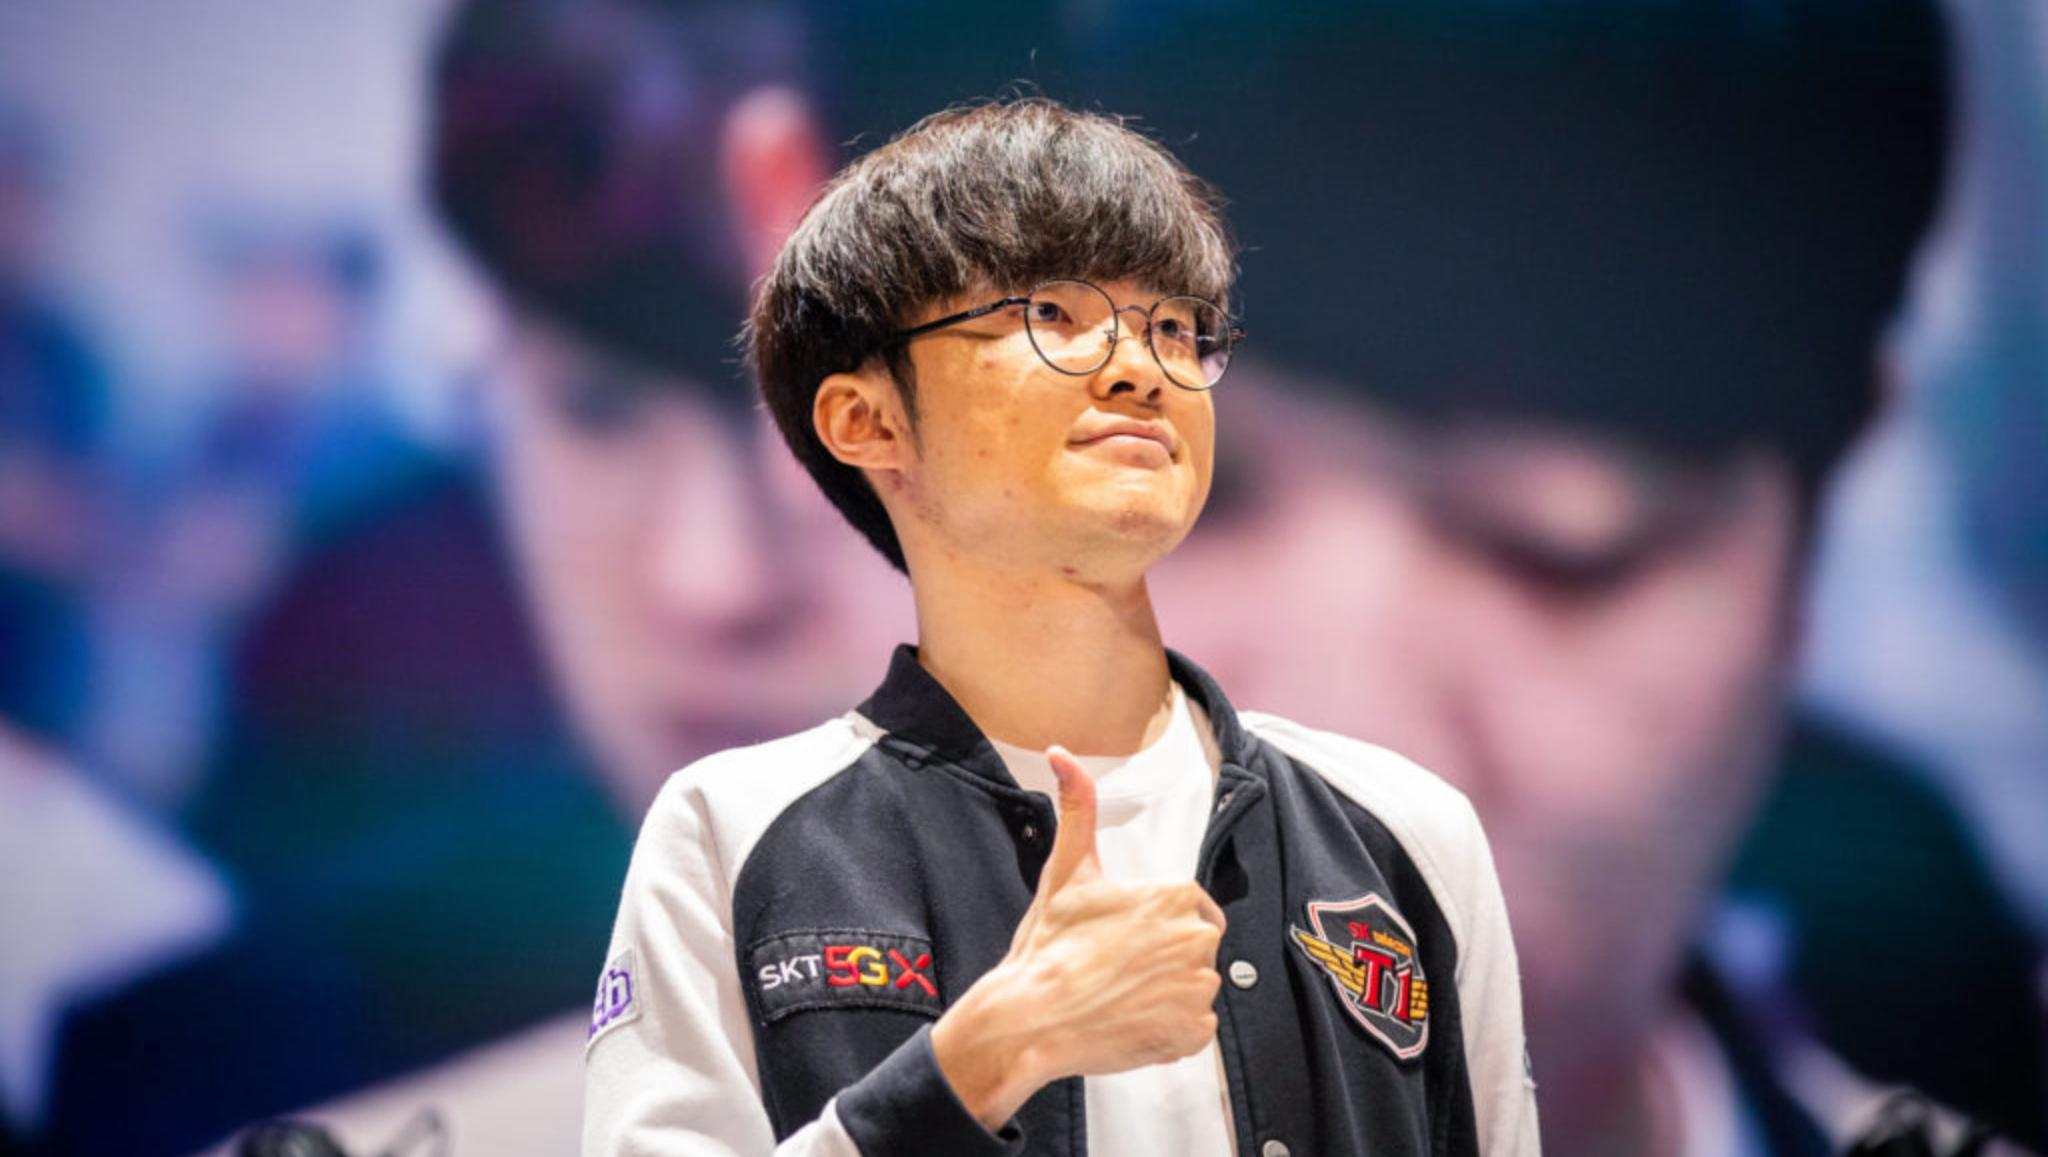 T1 Faker is back to individual practice, may return sooner than expected 